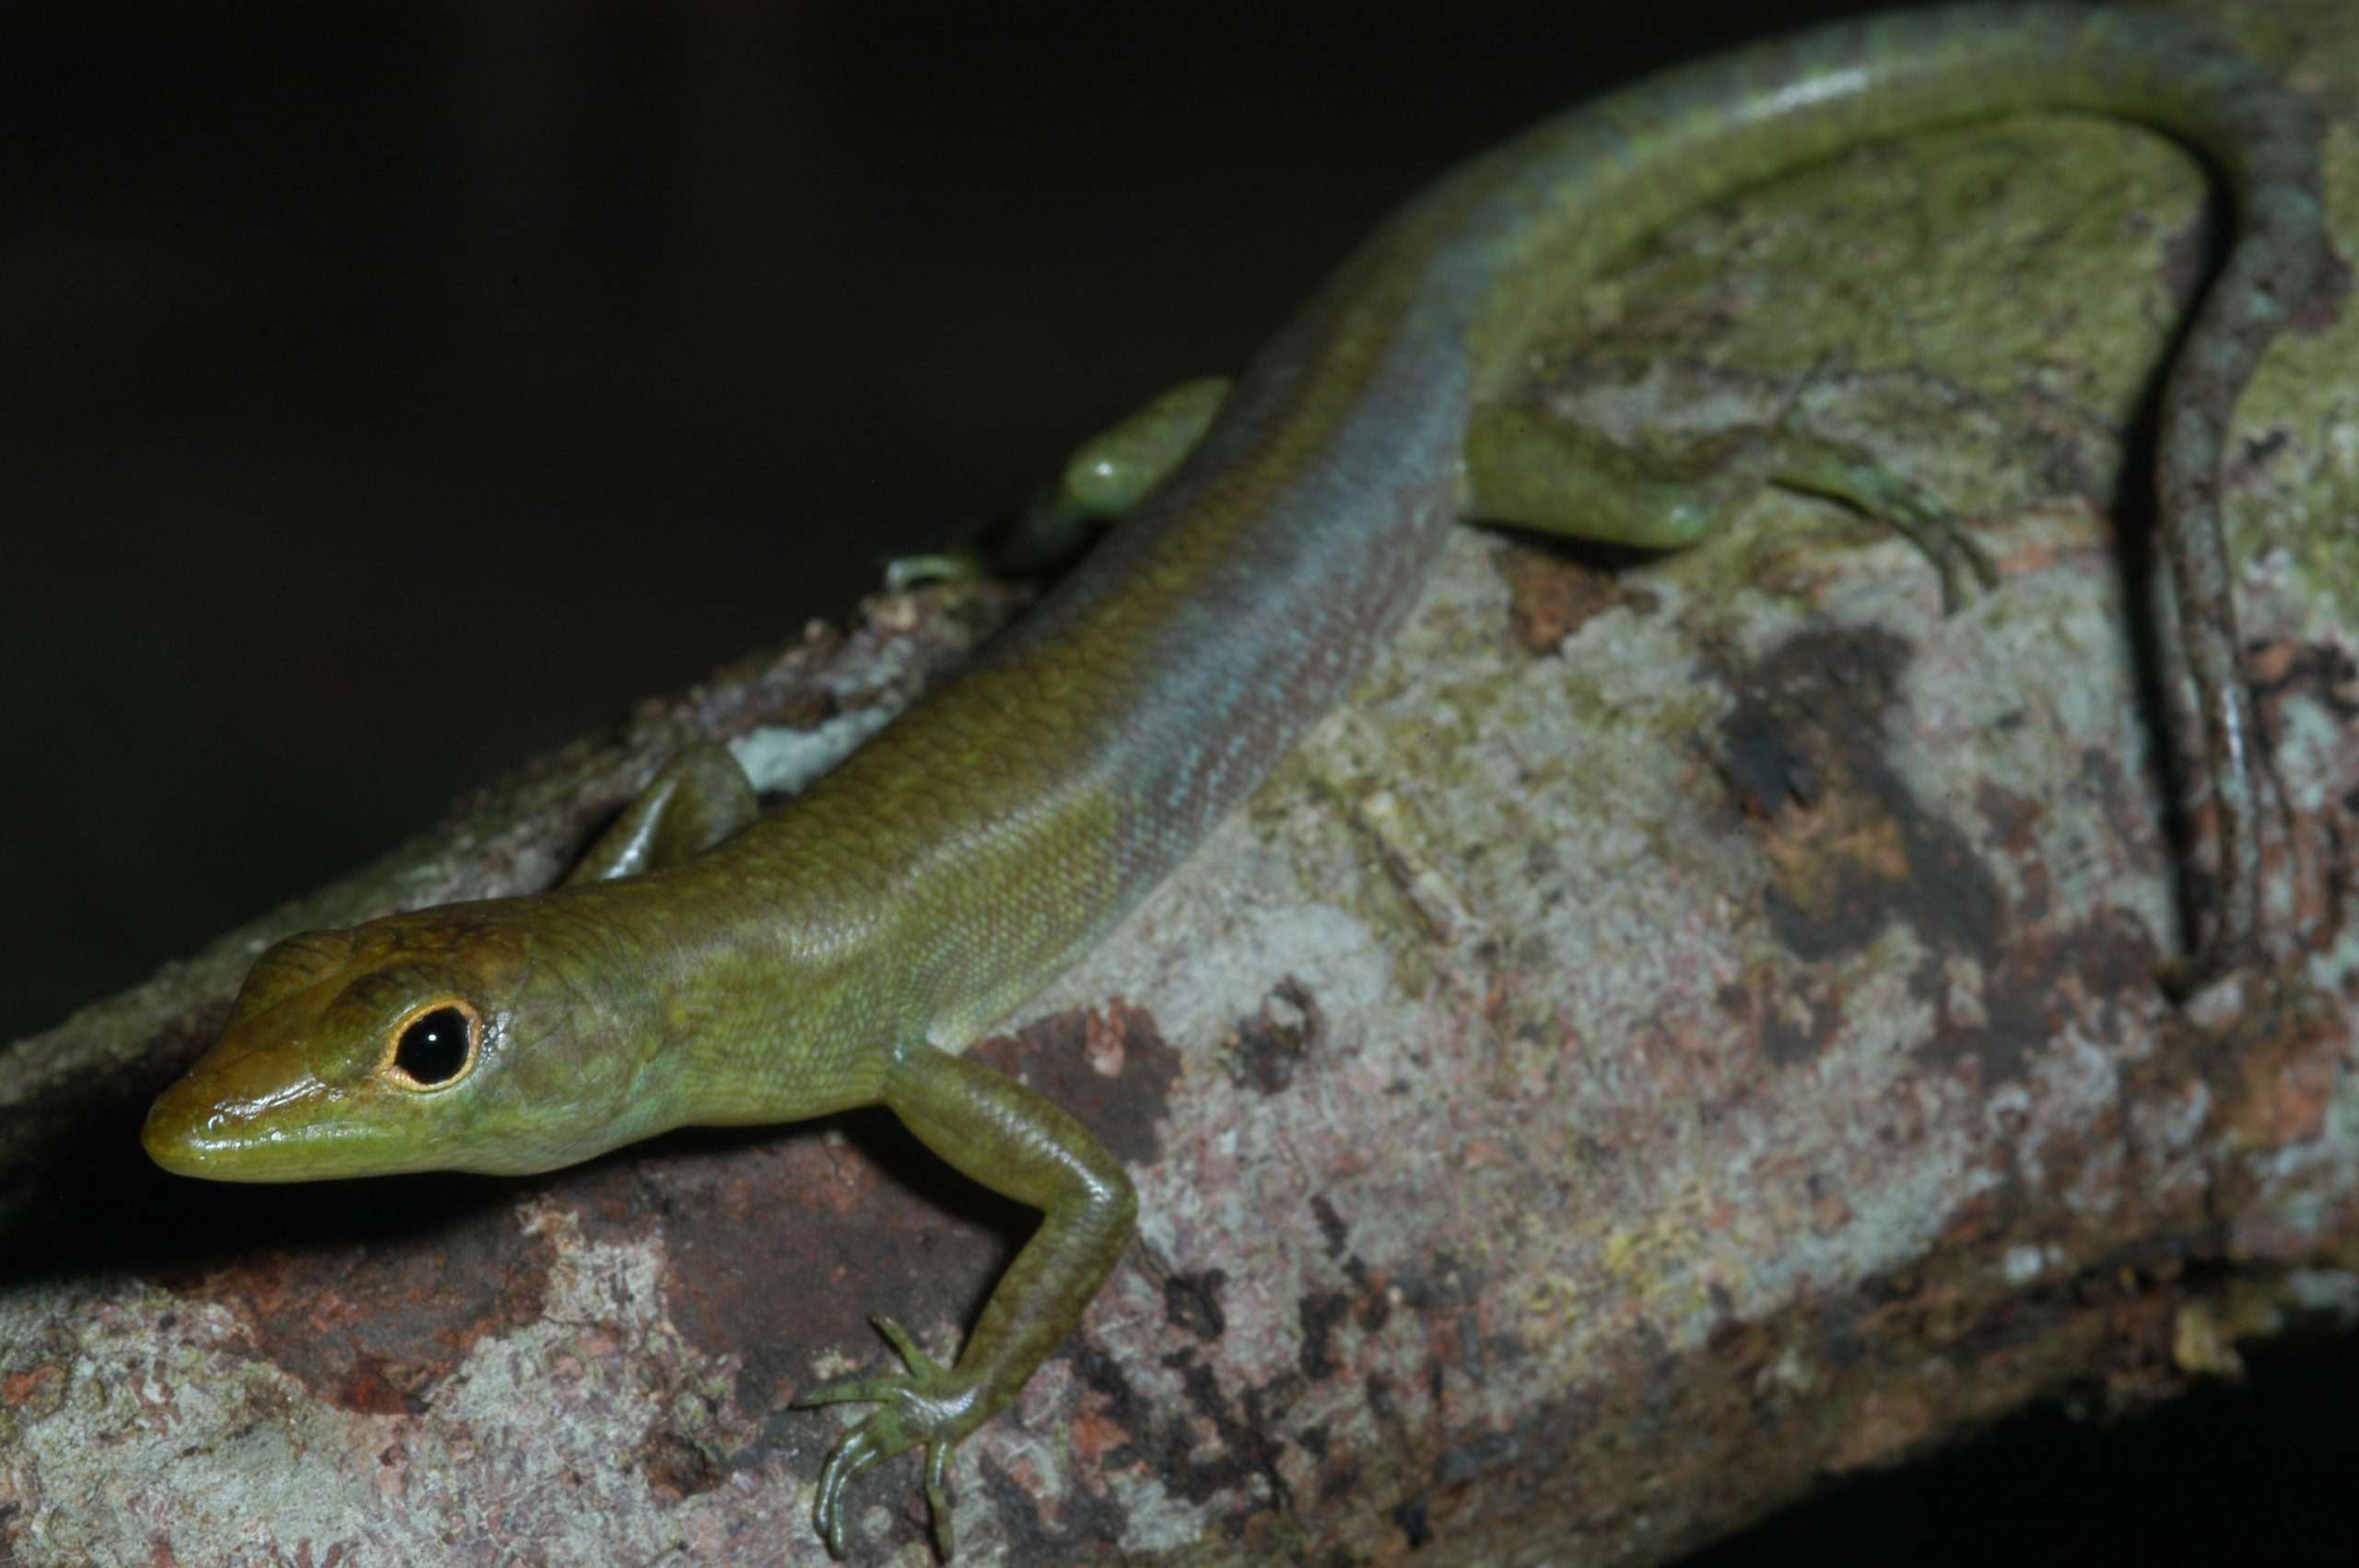 Lizards With Toxic Green Blood Are Super Freaky